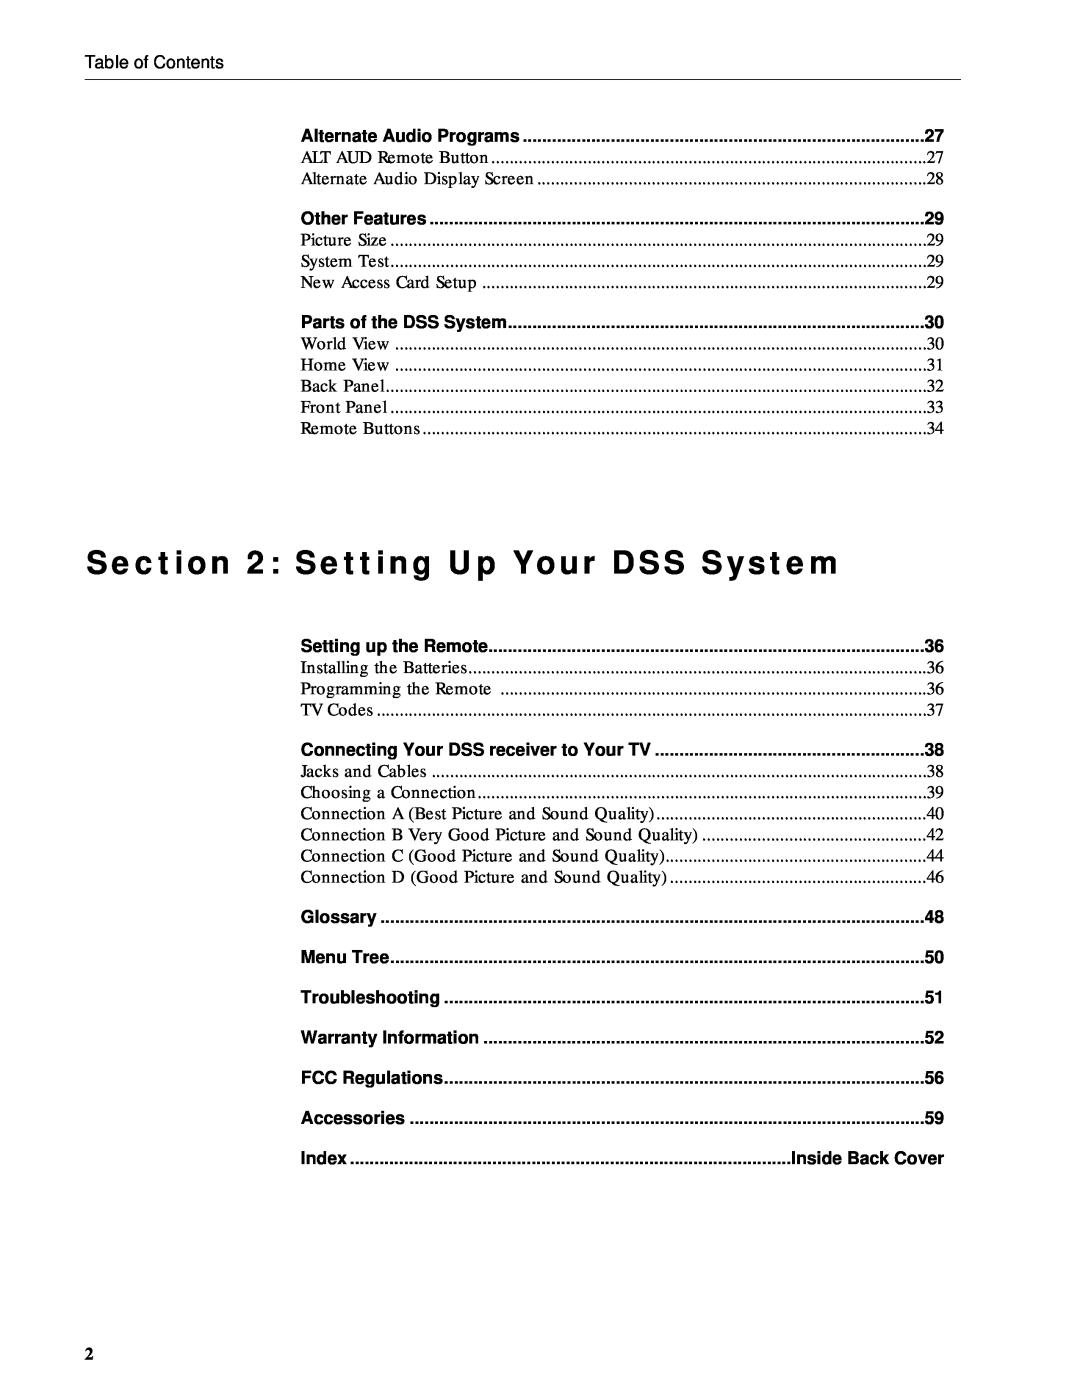 RCA DRD212NW user manual Setting Up Your DSS System, Inside Back Cover 